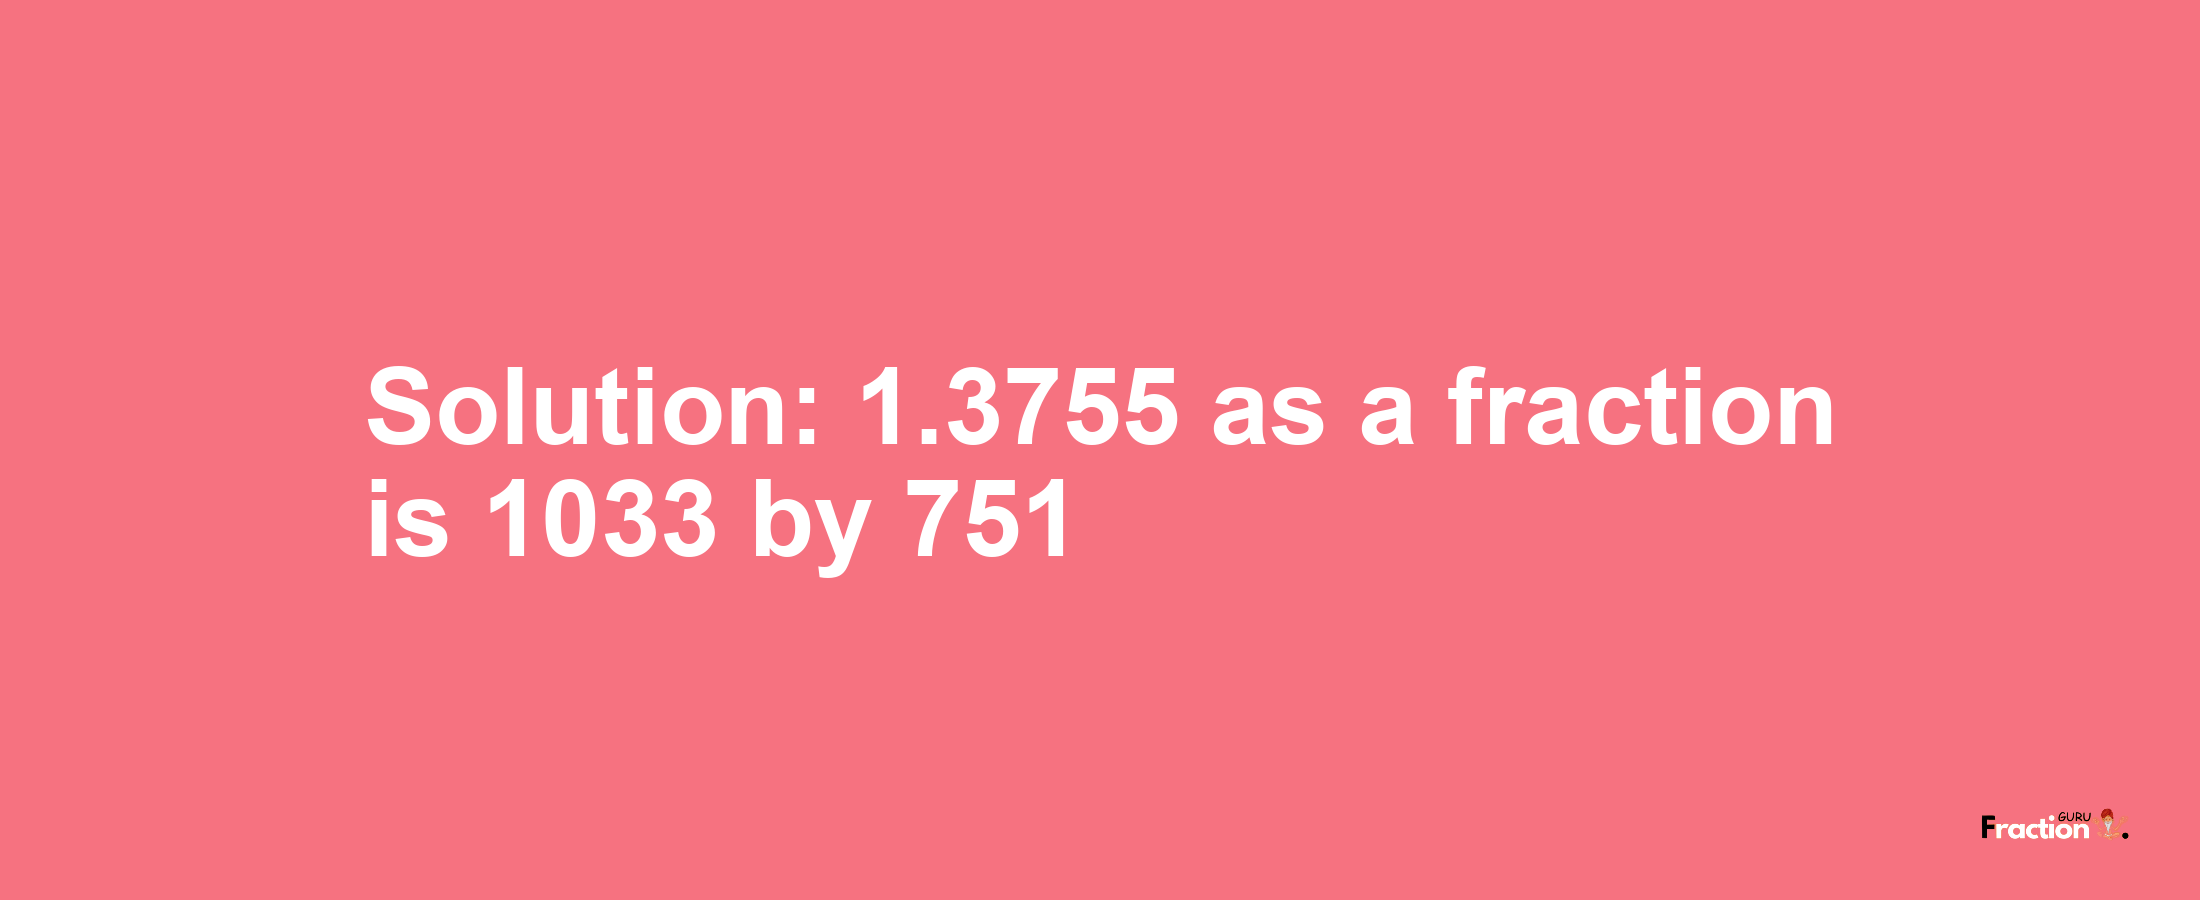 Solution:1.3755 as a fraction is 1033/751